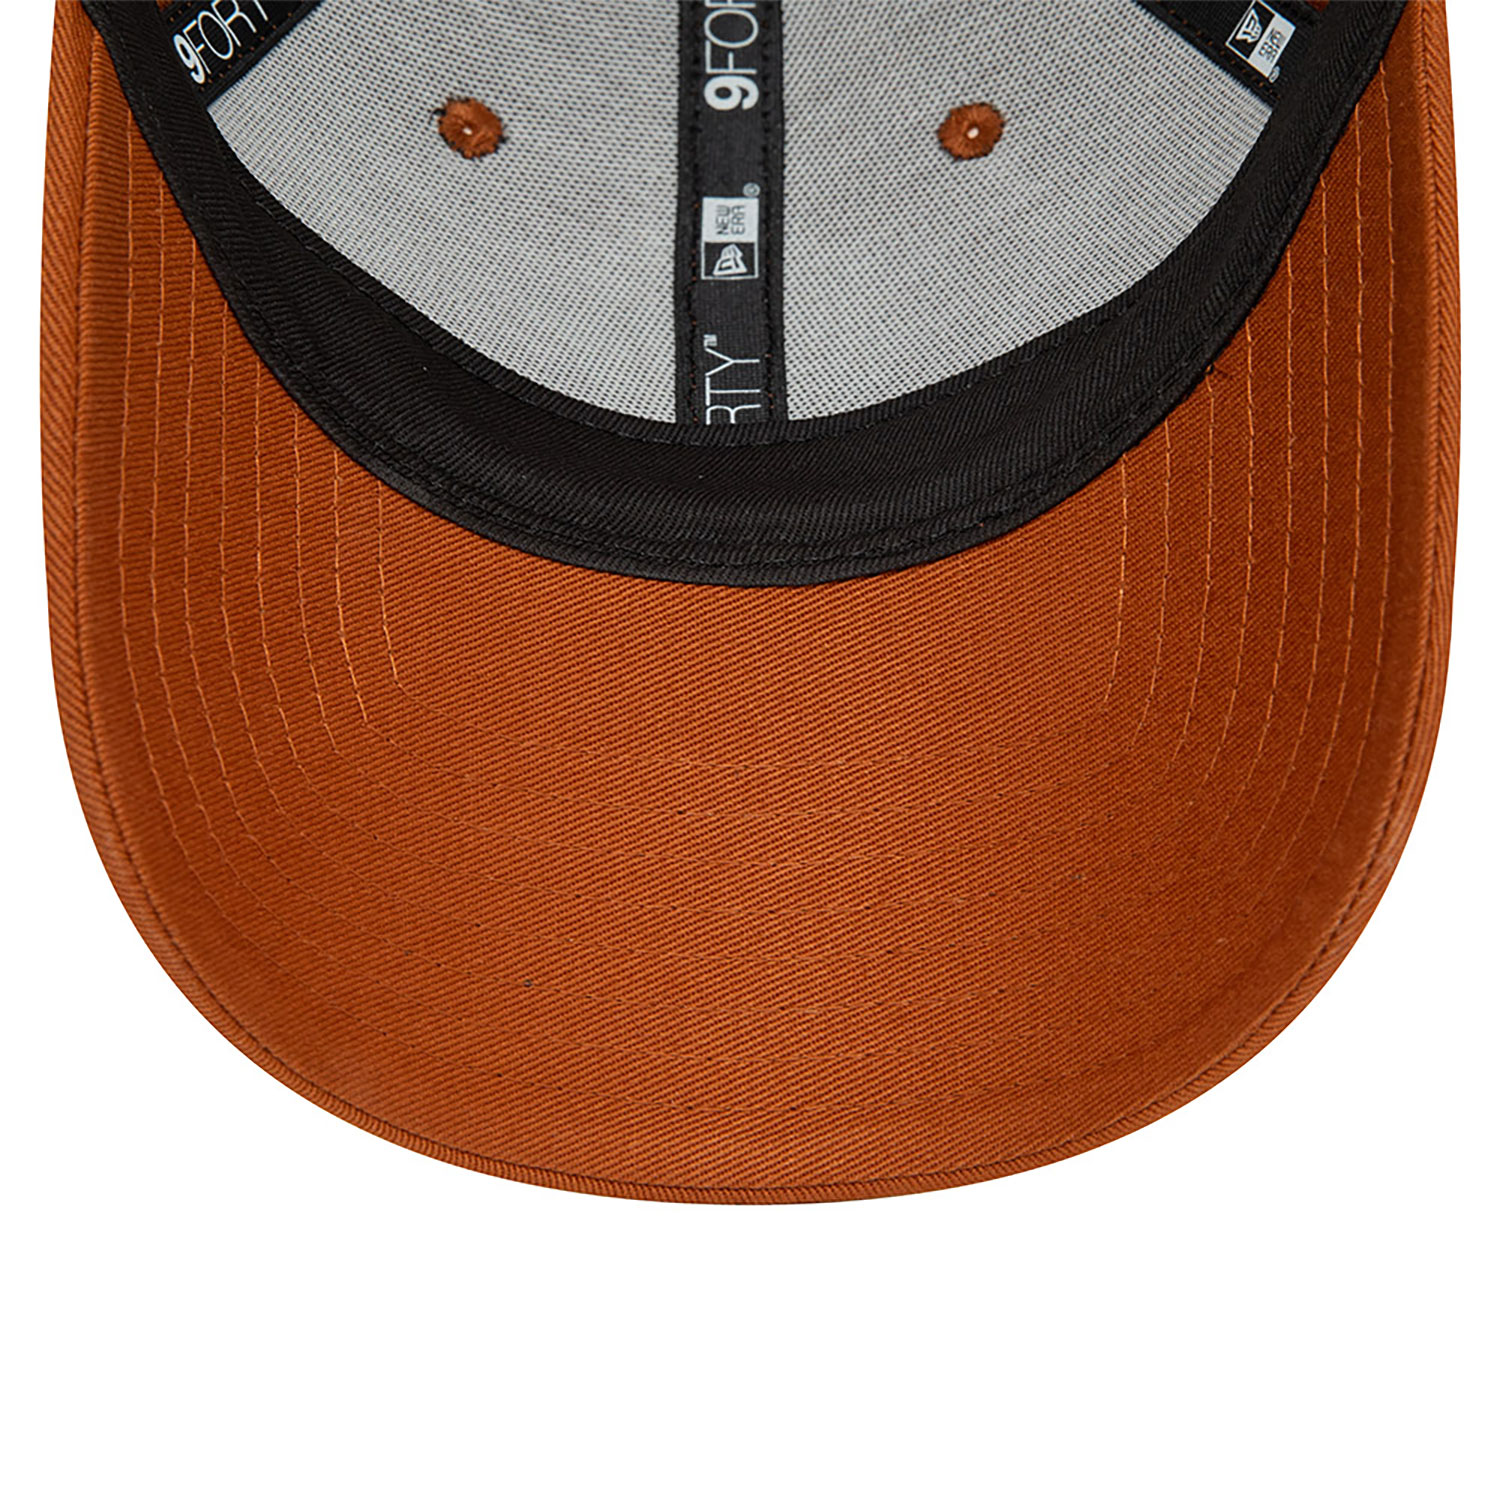 Rugby Football Union Heritage Brown 9FORTY Adjustable Cap